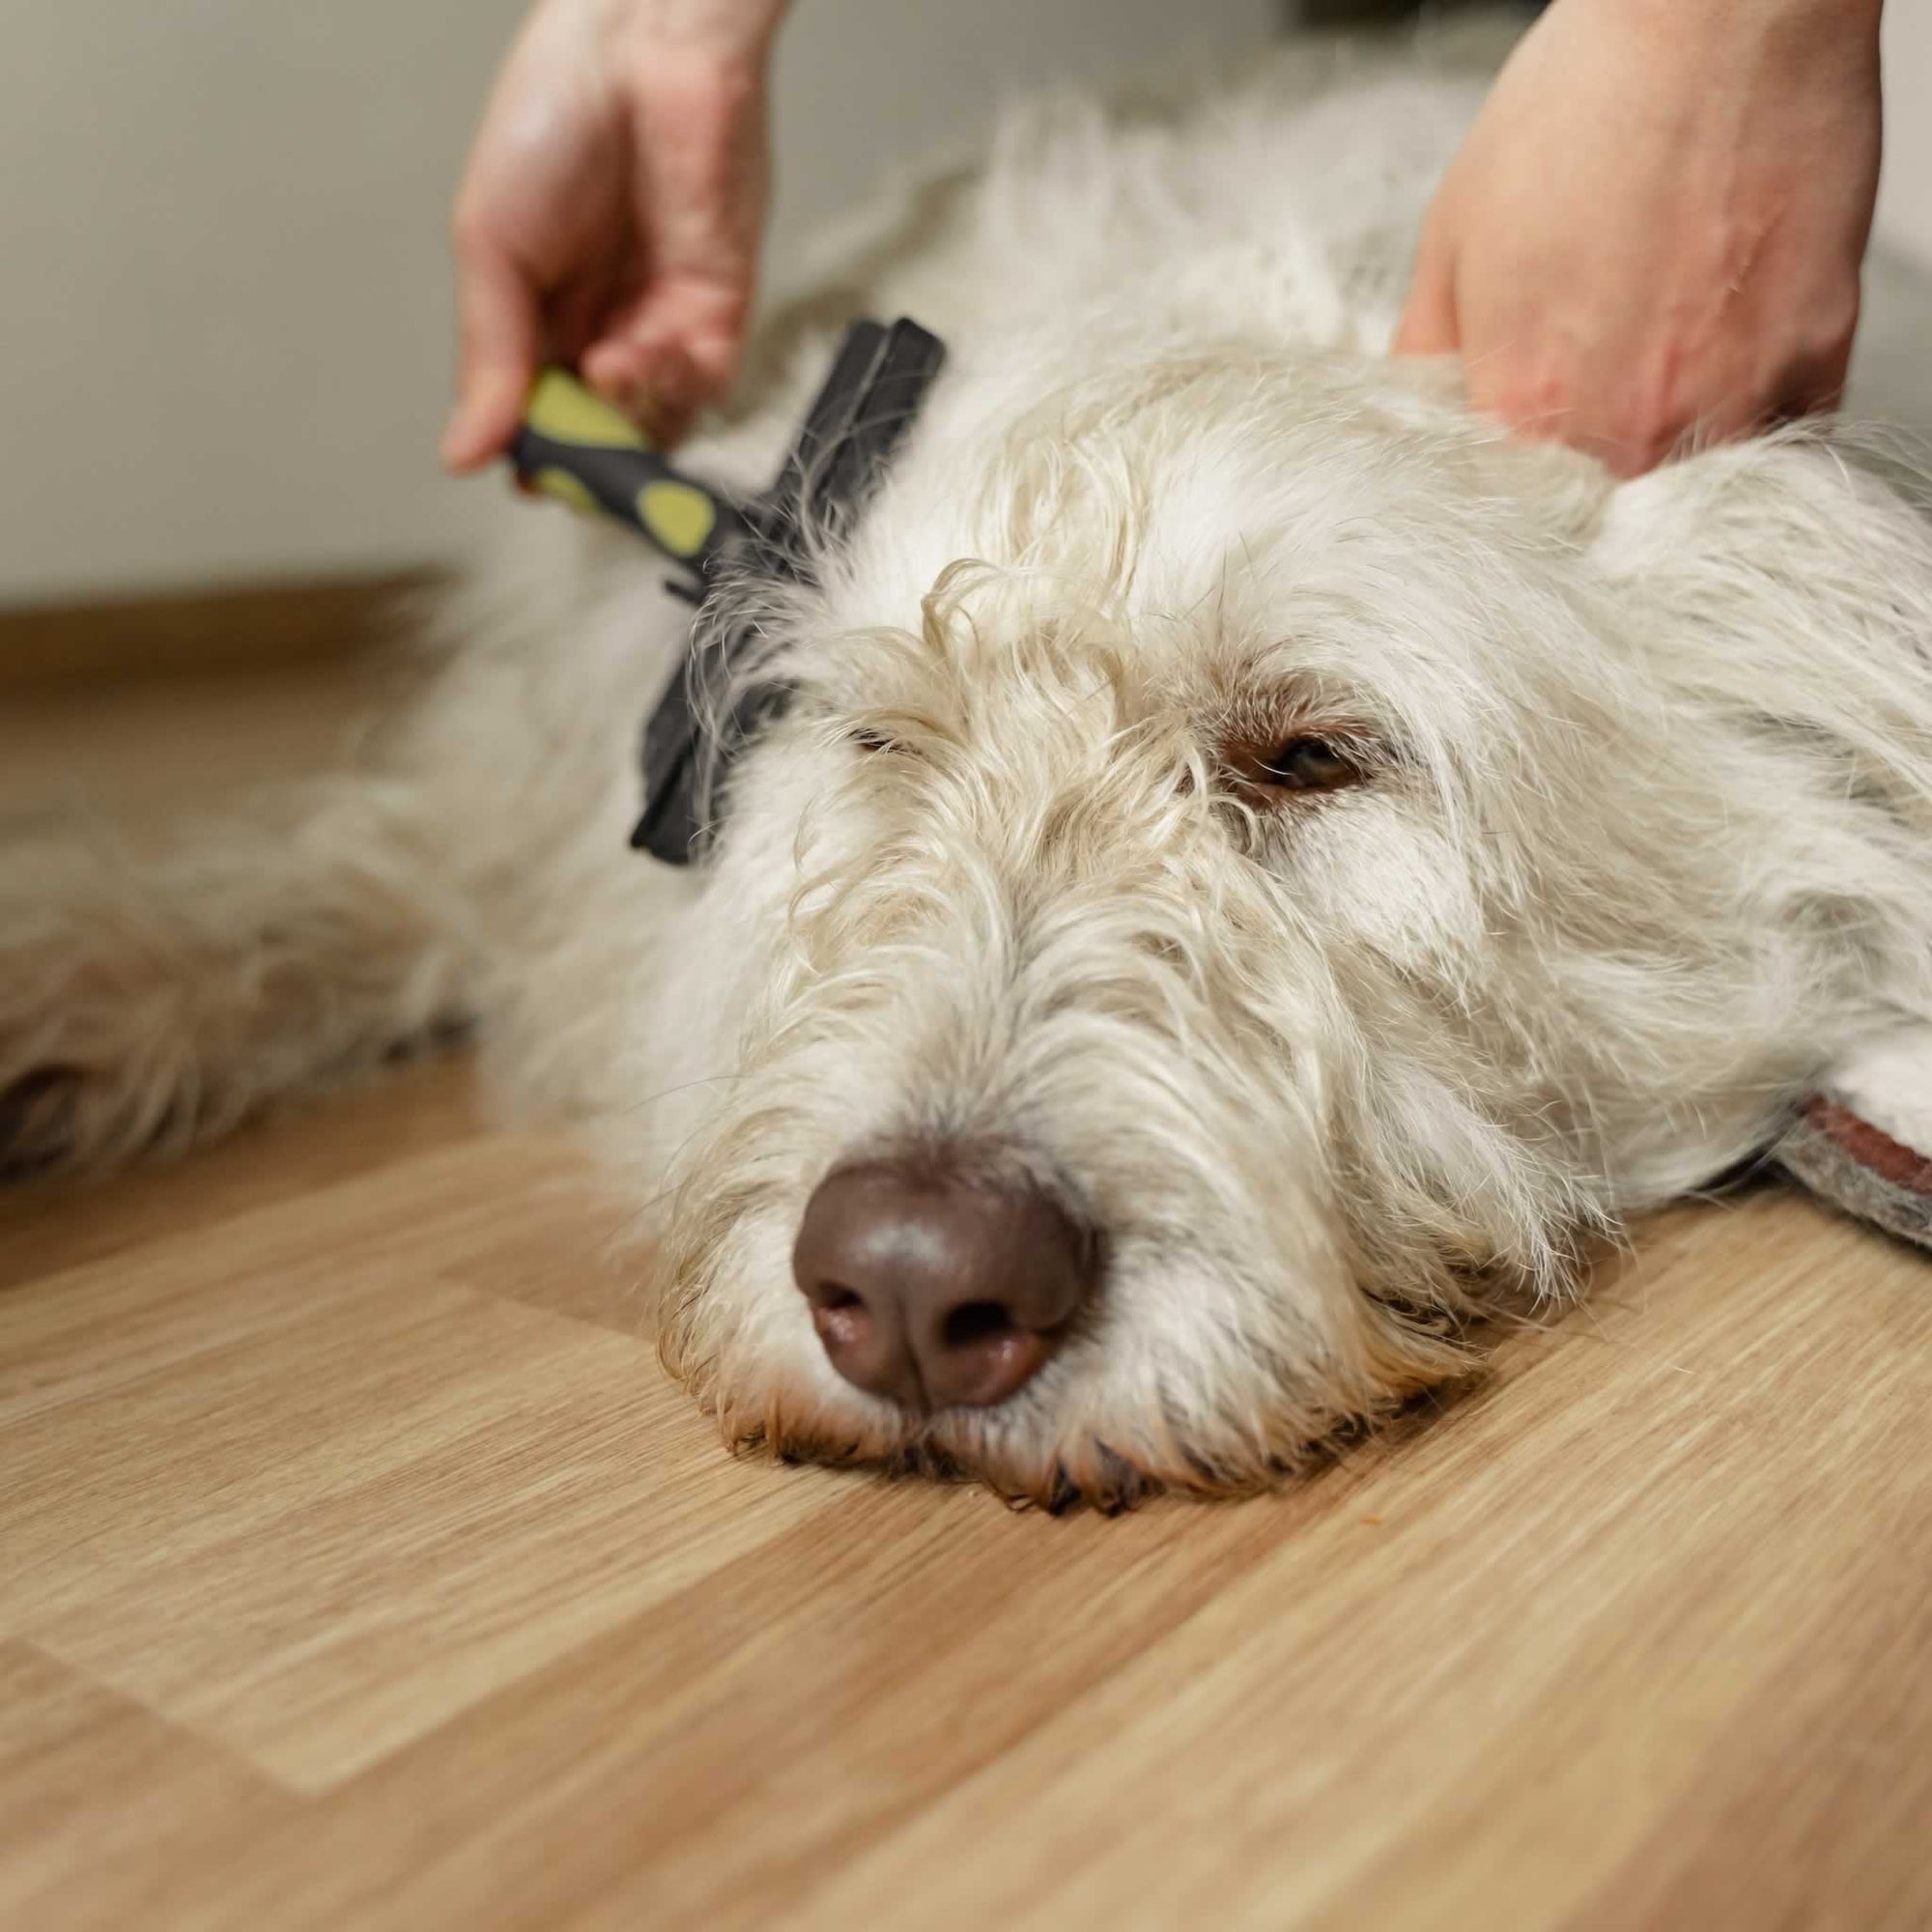 An old dog laying on the floor getting brushed by his owner.